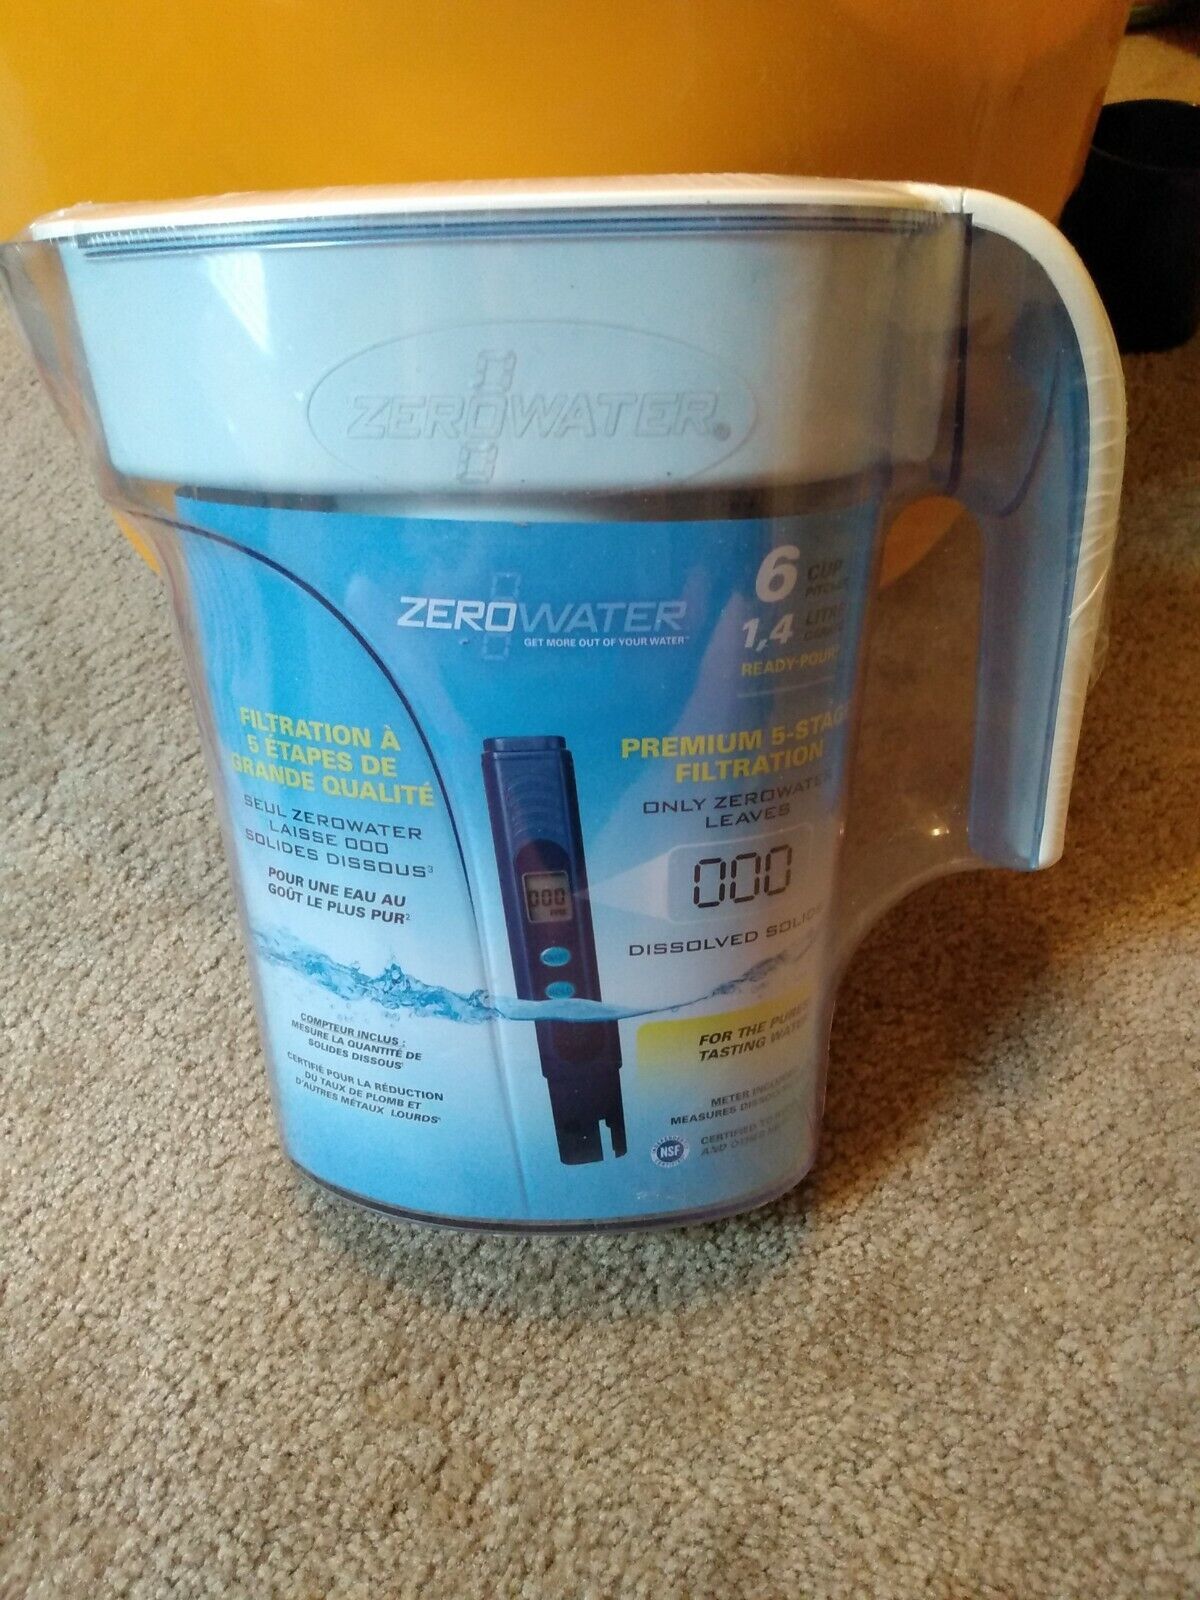 ZeroWater ZP-006-4, 6 Cup Water Filter Pitcher with Water Quality Meter,White - $24.74